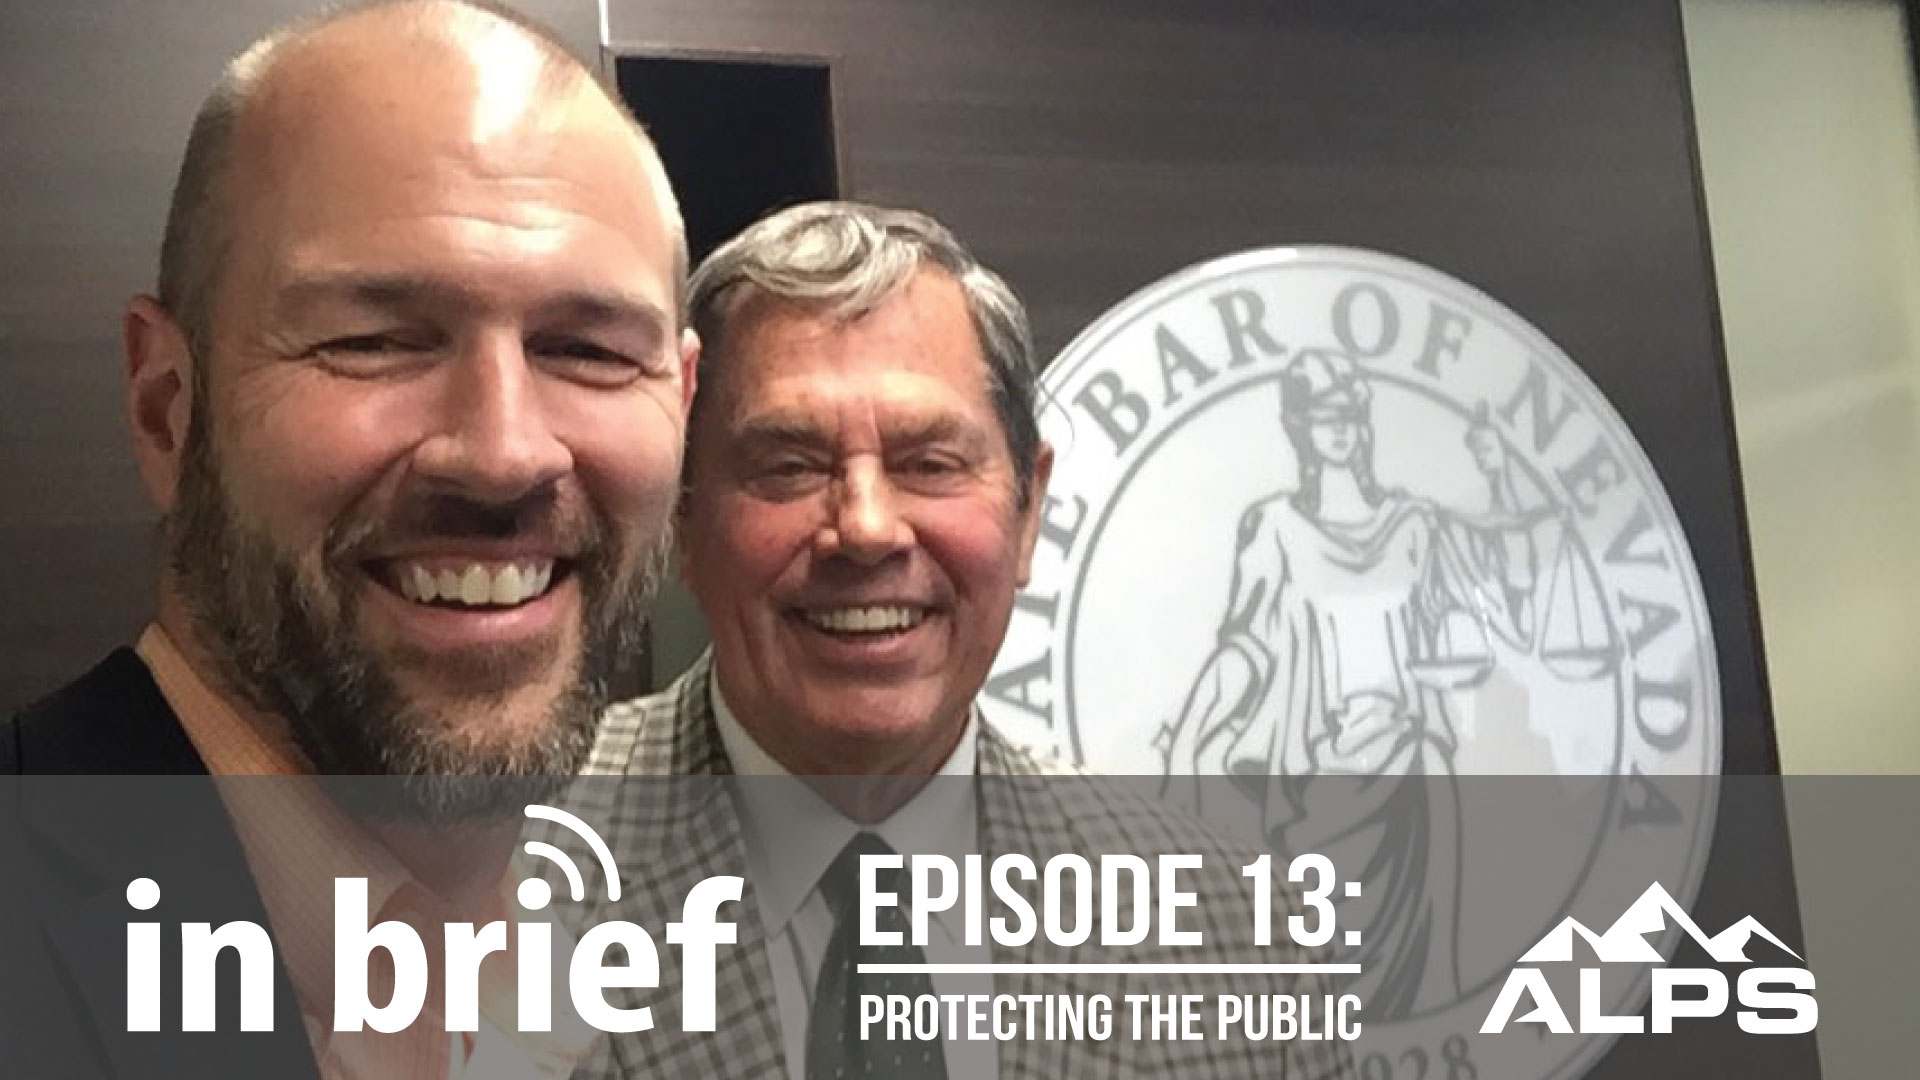 ALPS In Brief Podcast - Episode 13: Protecting the Public